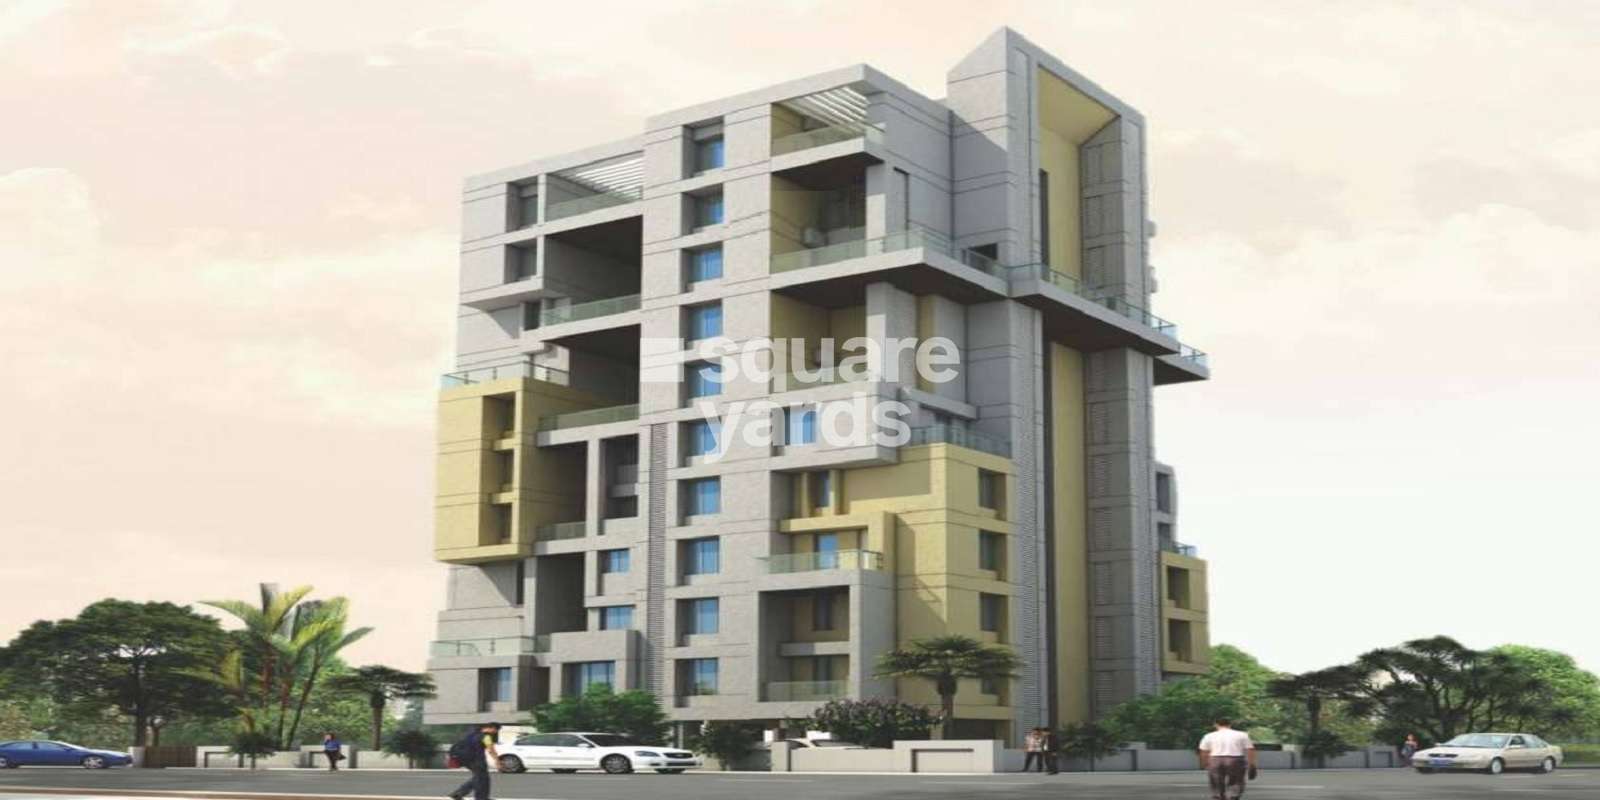 Sunit Anant Apartment Cover Image